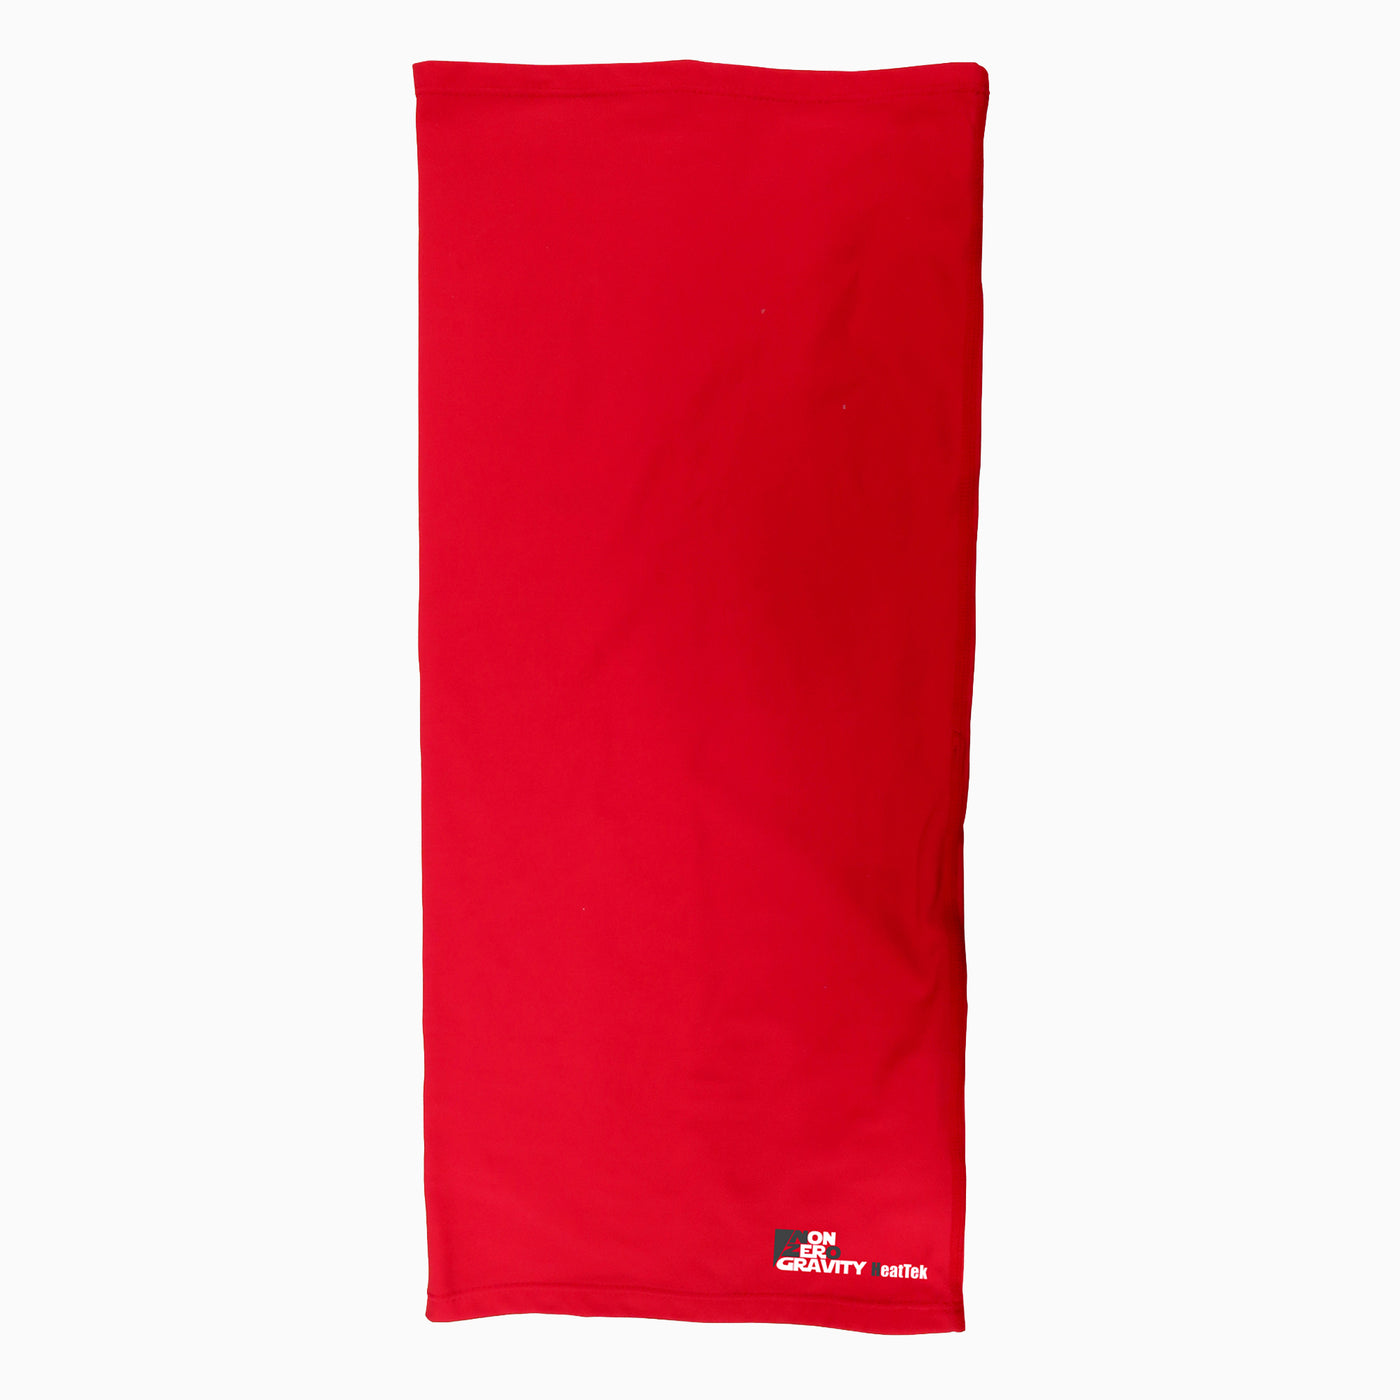 a red spandex neck gaiter to mask and protect your face